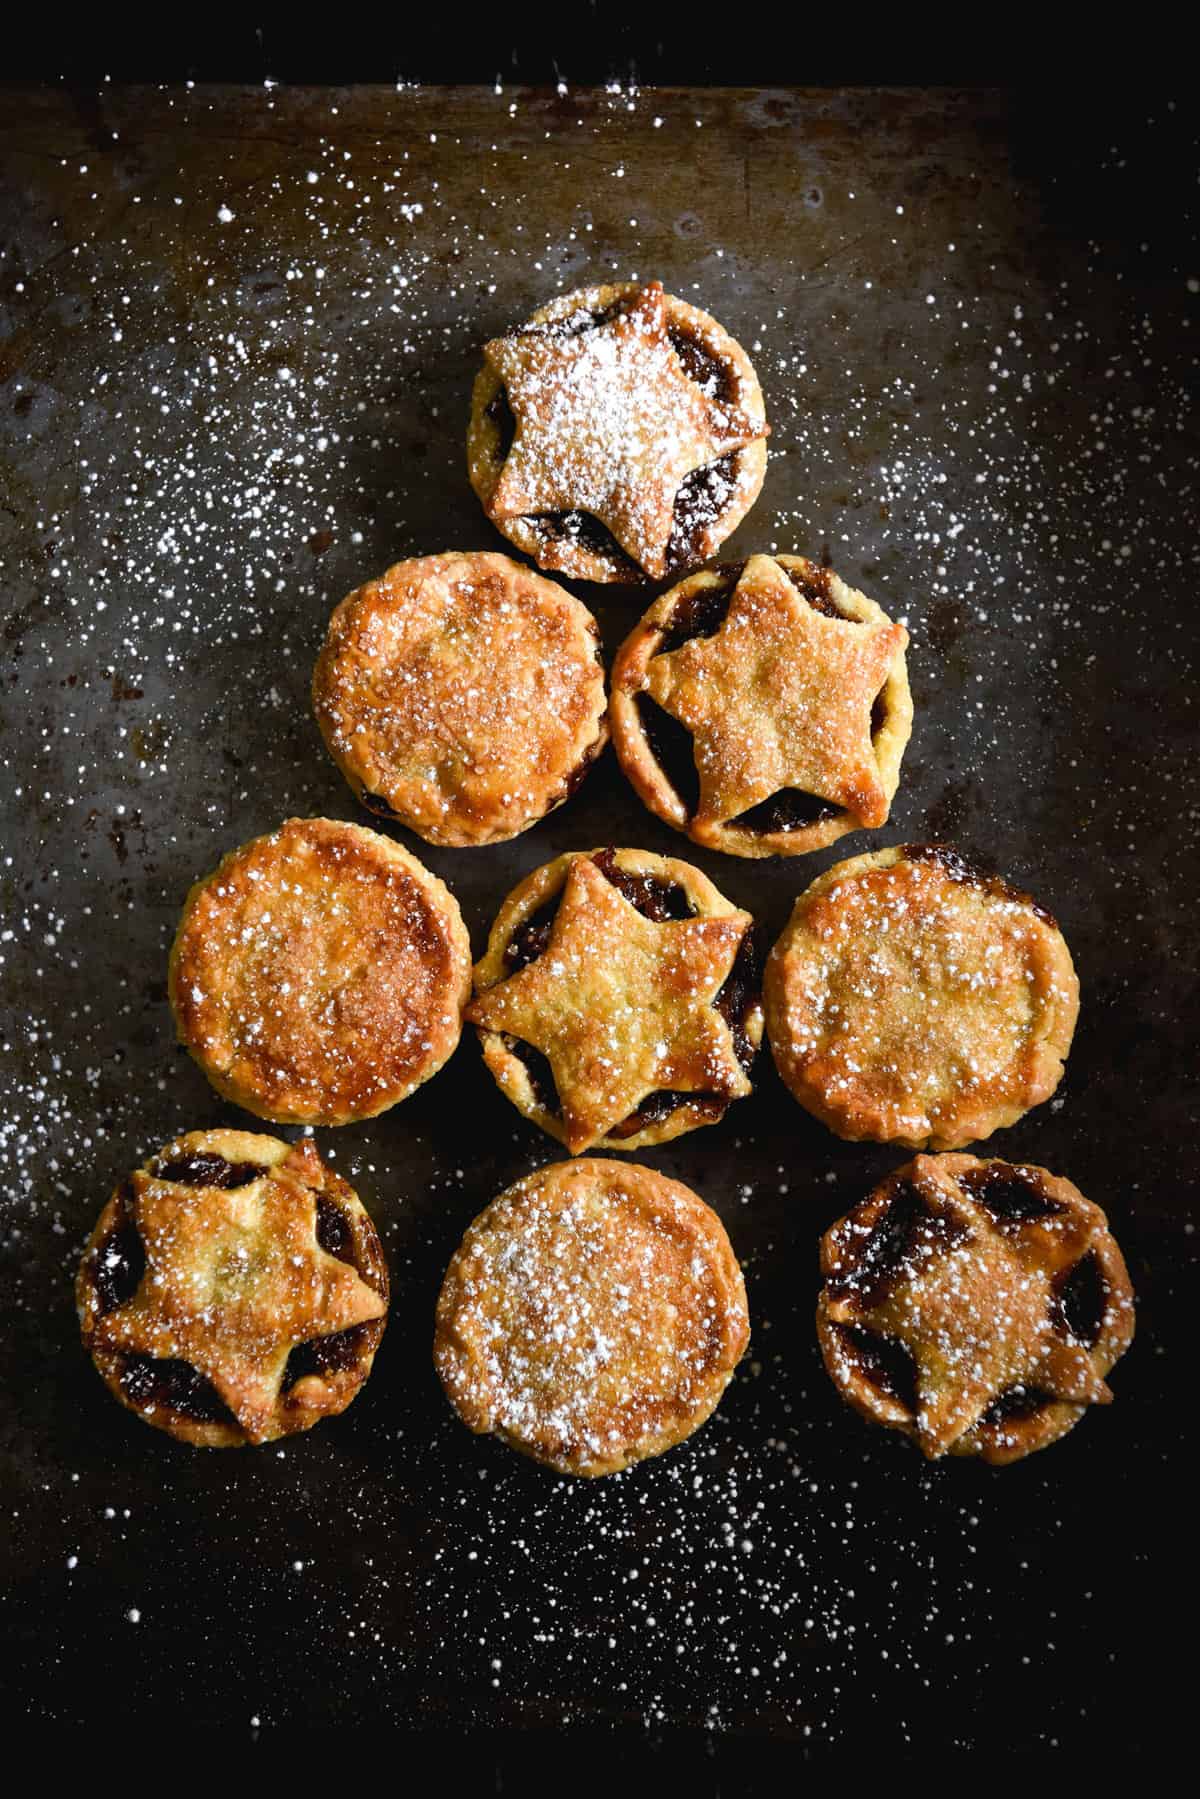 Gluten free, fruit free mince pies arranged in the shape of a Christmas tree on a dark steel backdrop. Some of the mince pies have full pastry tops, and some have cut out star decorations.